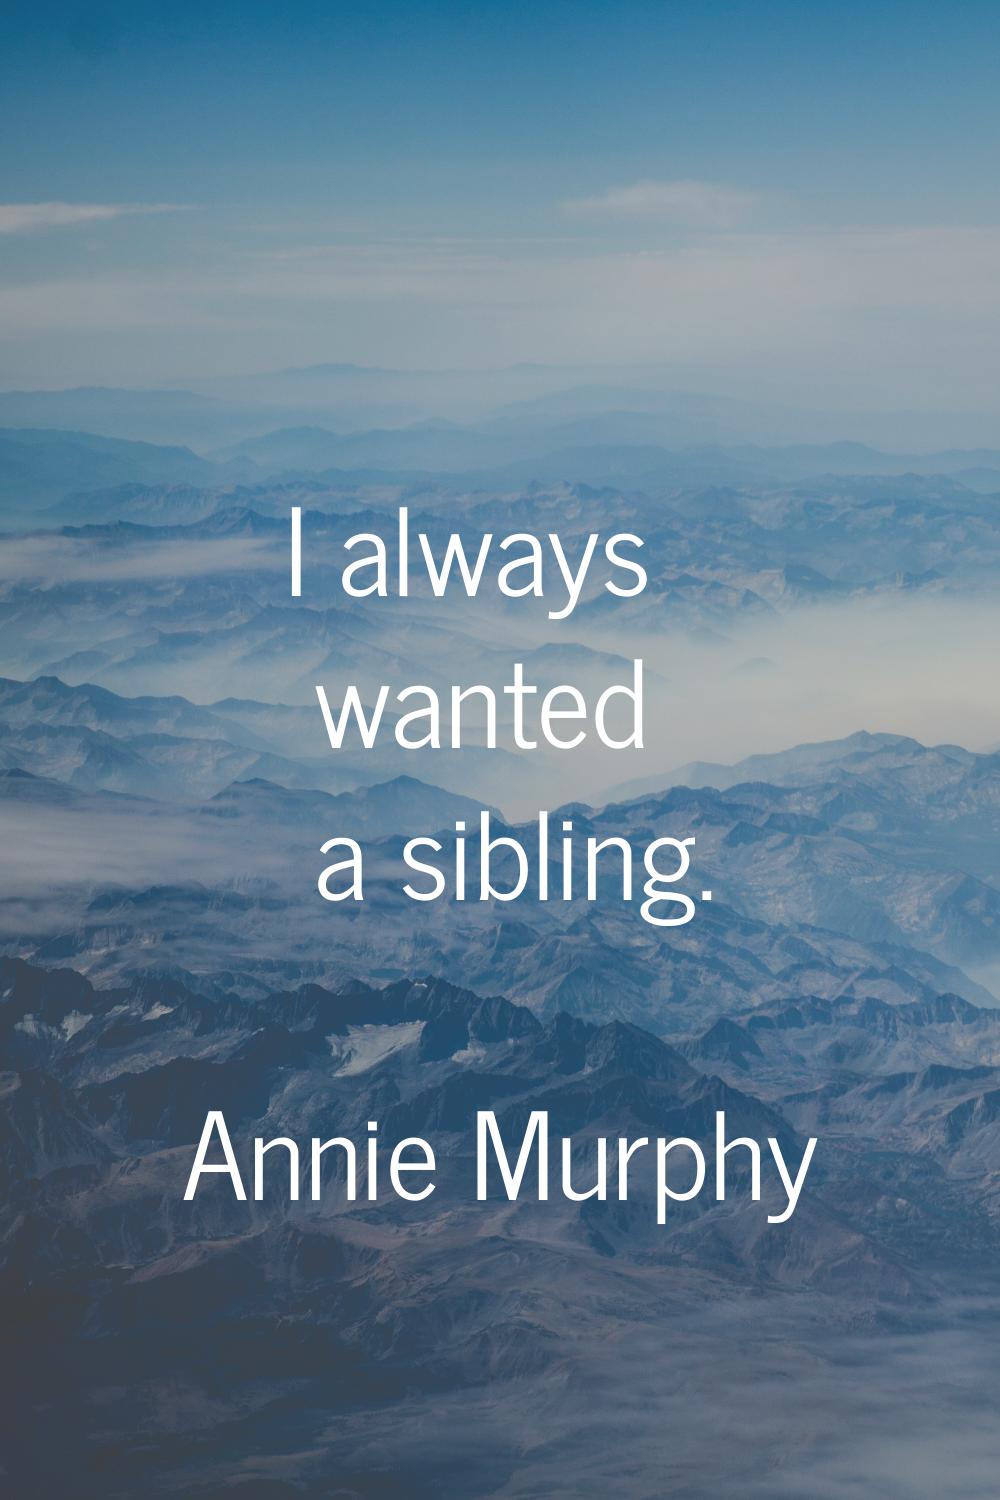 I always wanted a sibling.